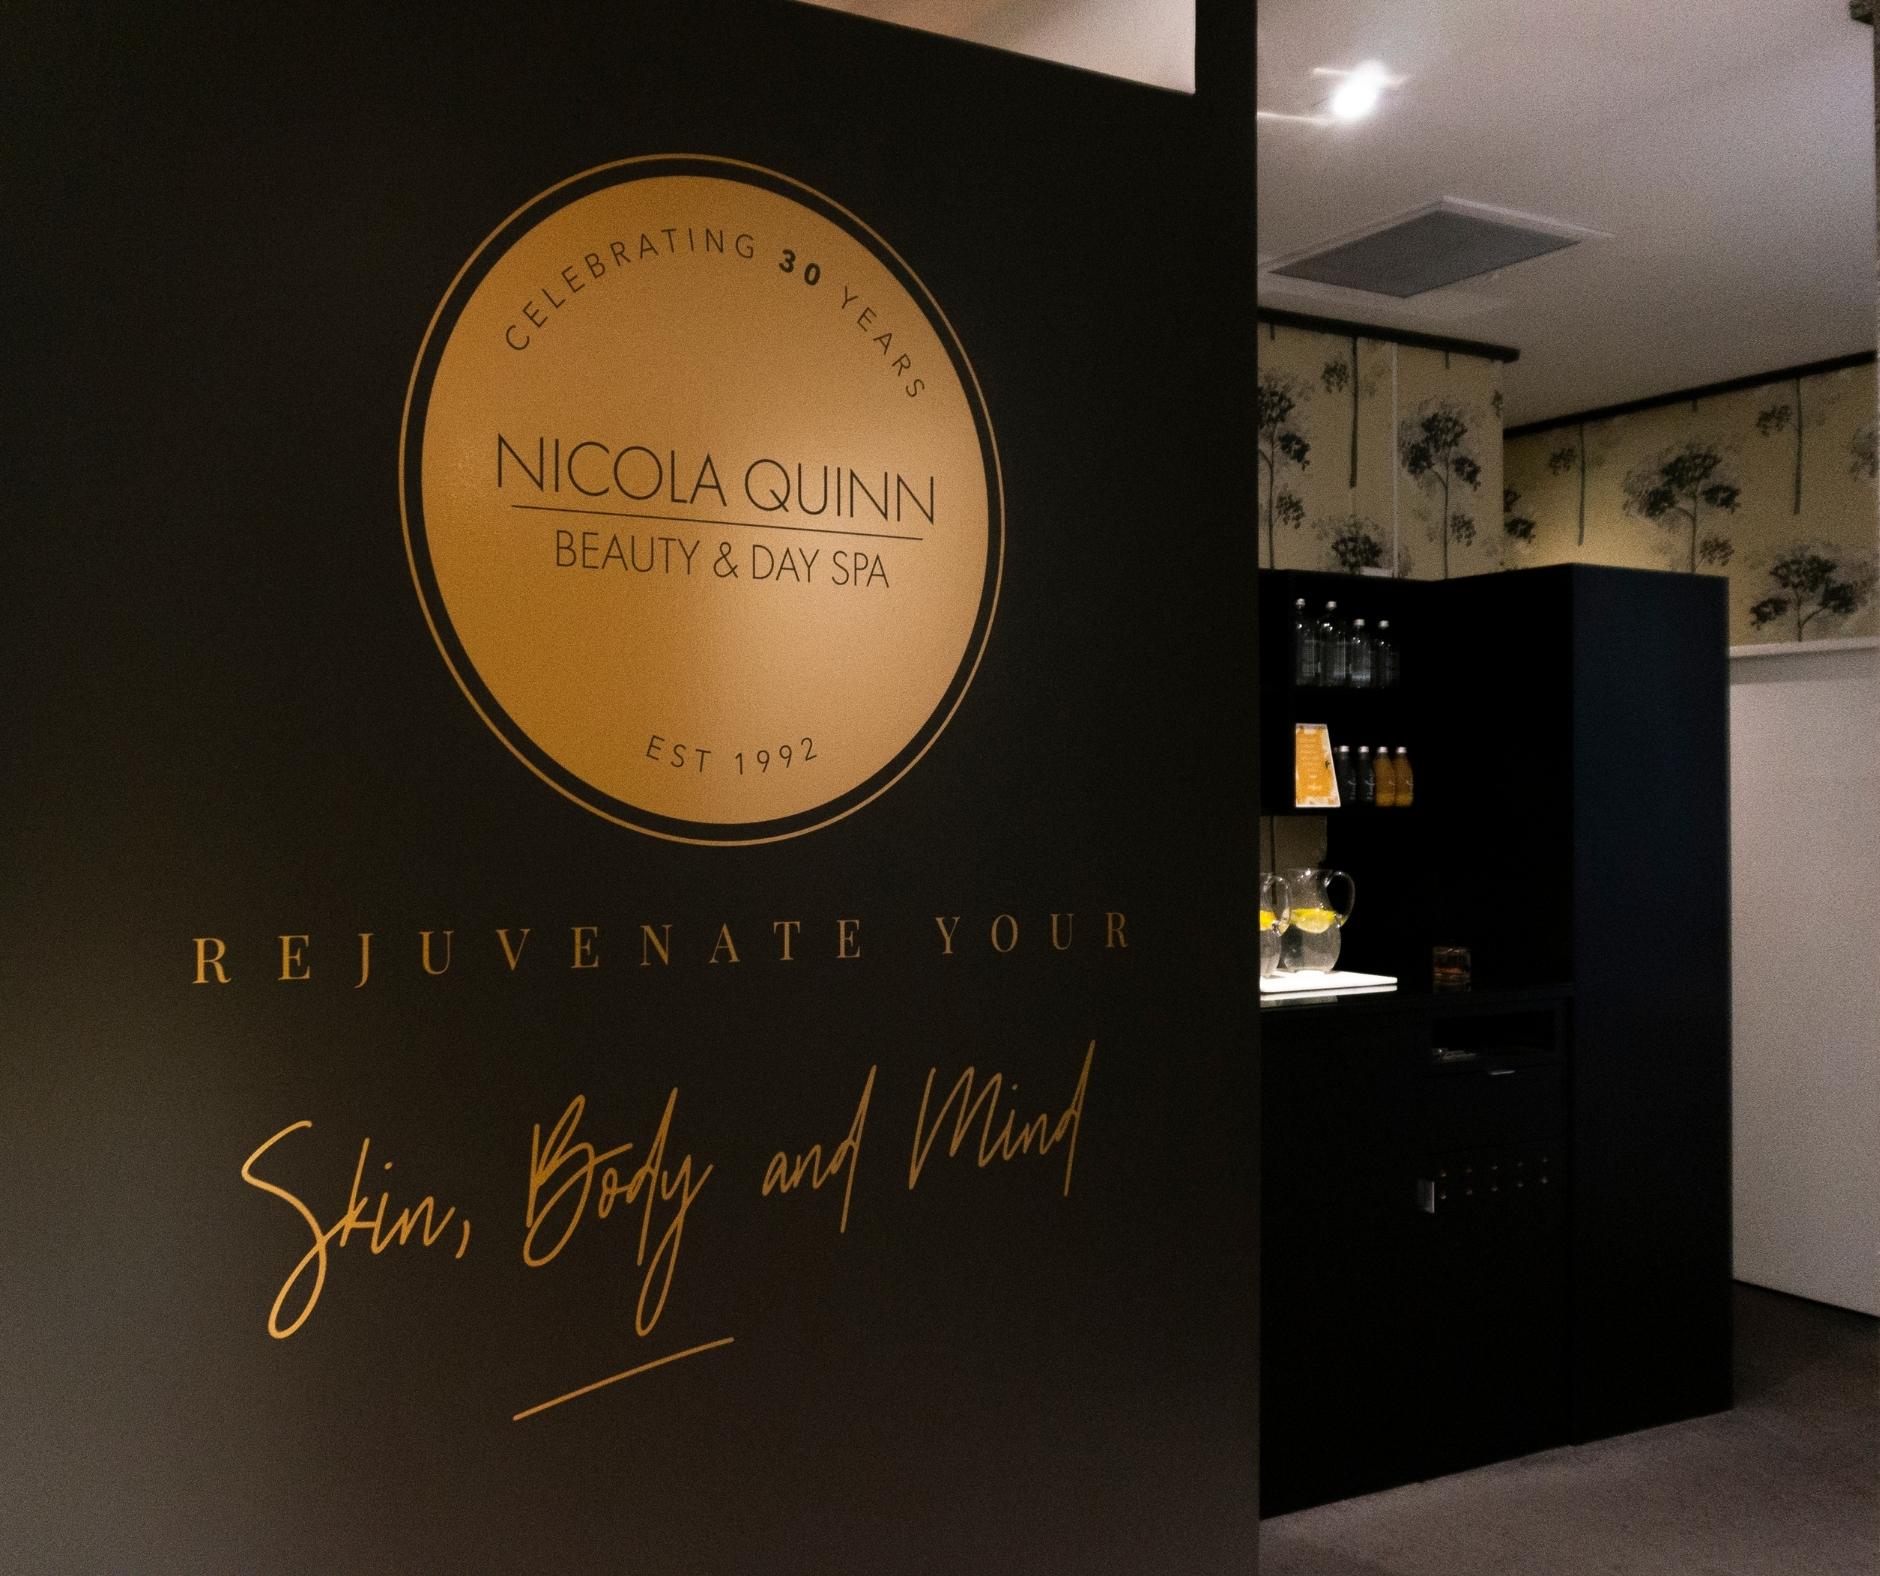 Nicola Quinn Beauty & Spa celebrating 30 Years in business